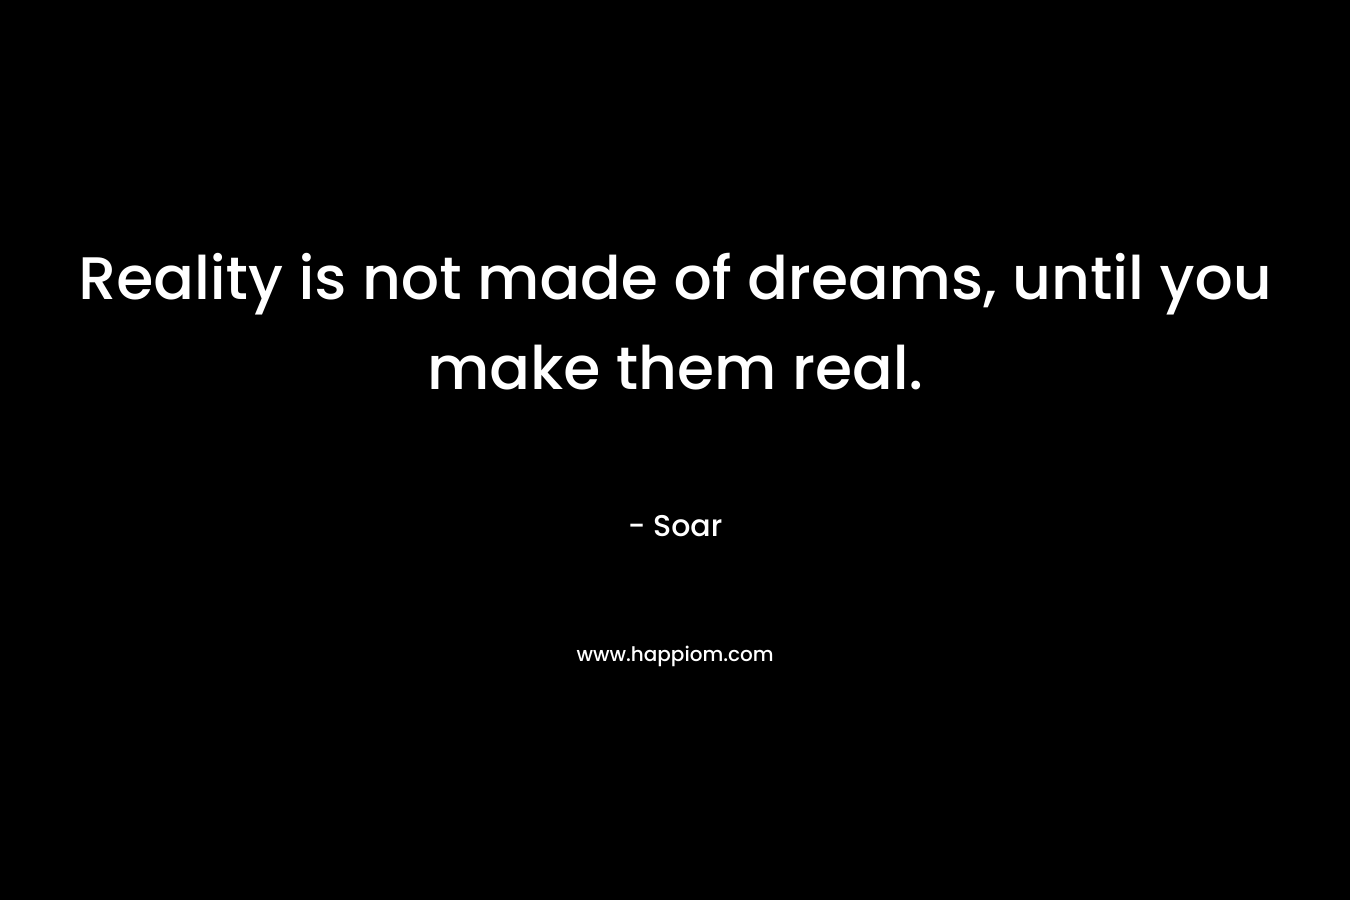 Reality is not made of dreams, until you make them real. – Soar